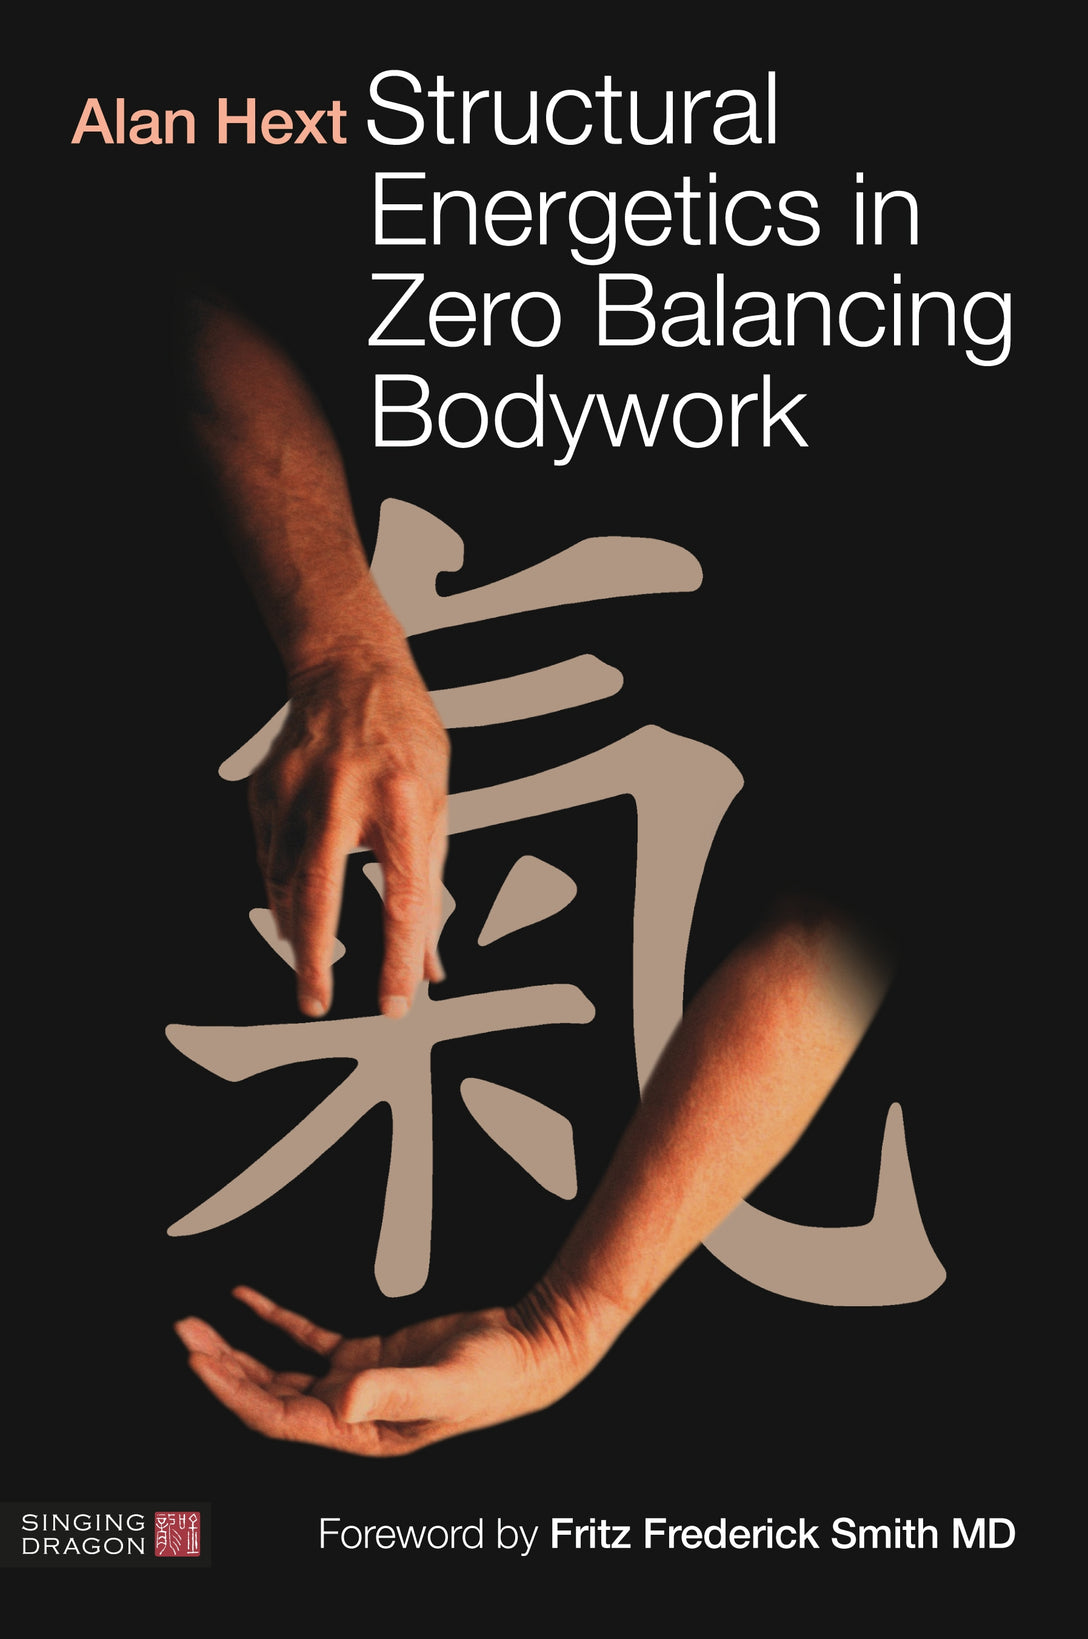 Structural Energetics in Zero Balancing Bodywork by Fritz Frederick Smith, MD, Alan Hext